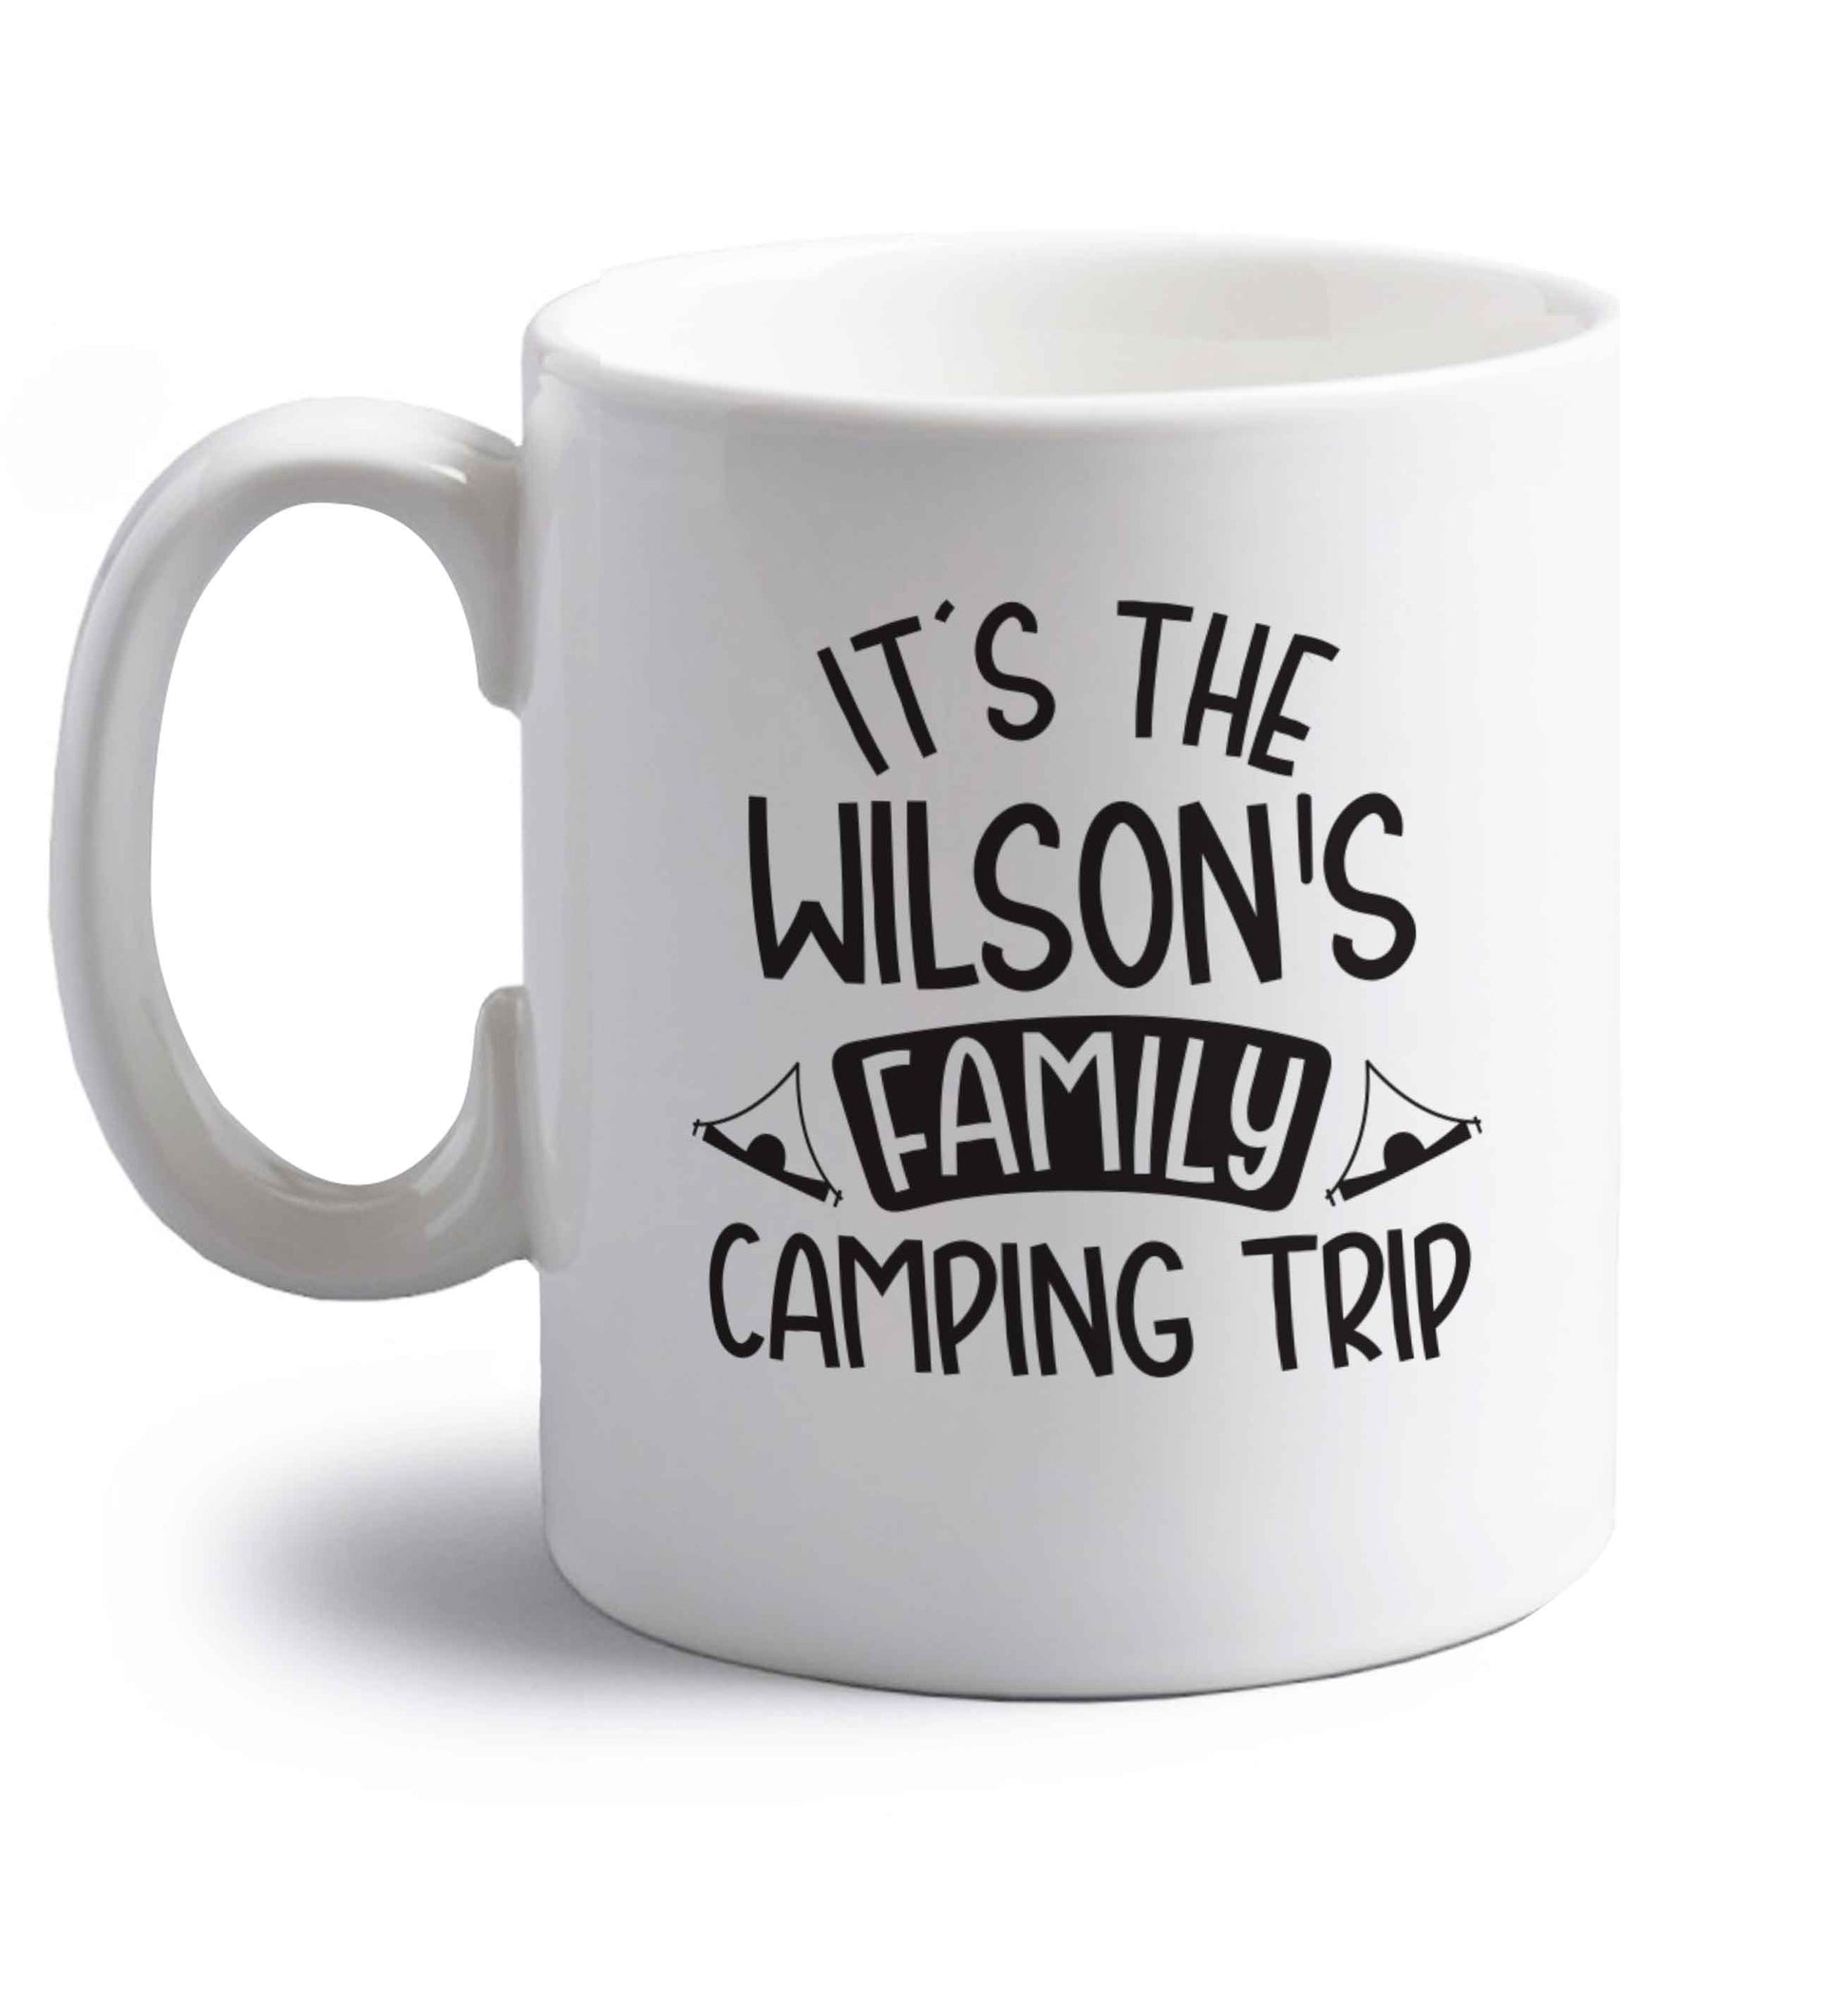 It's the Wilson's family camping trip personalised right handed white ceramic mug 